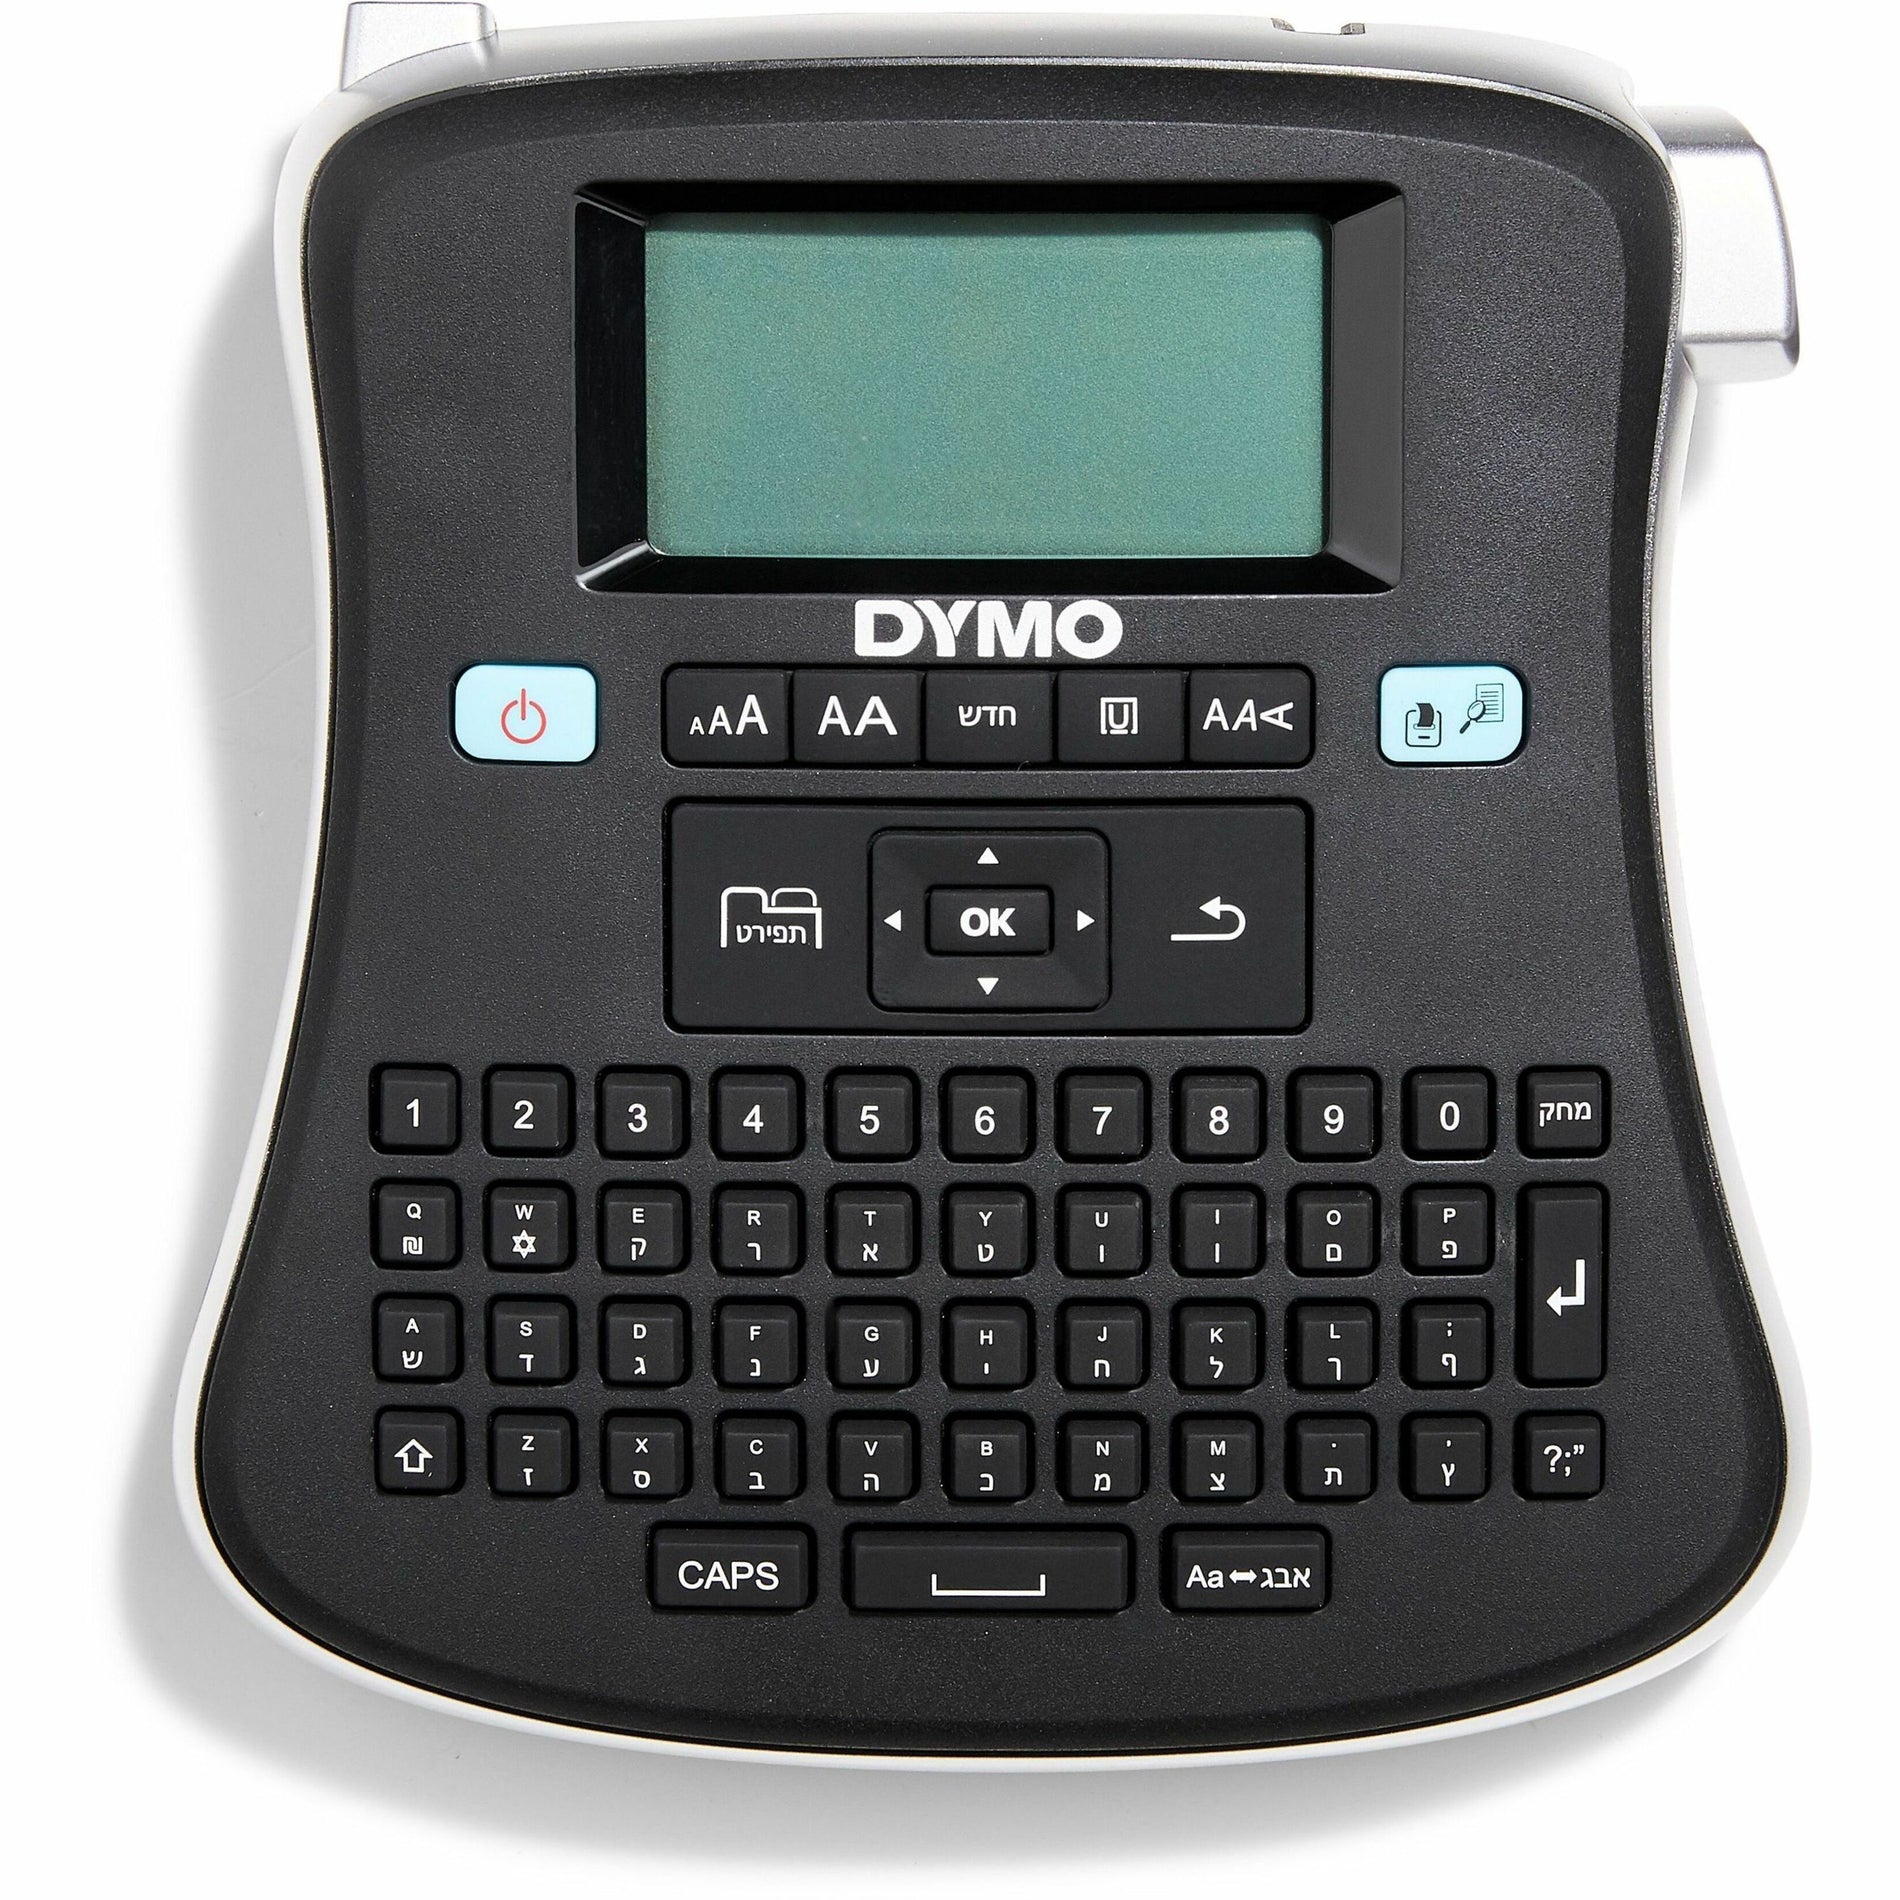 Dymo 2175085 LabelManager 210D All-Purpose Label Maker, Portable, Internal Memory, Save Text, English Layout Keyboard